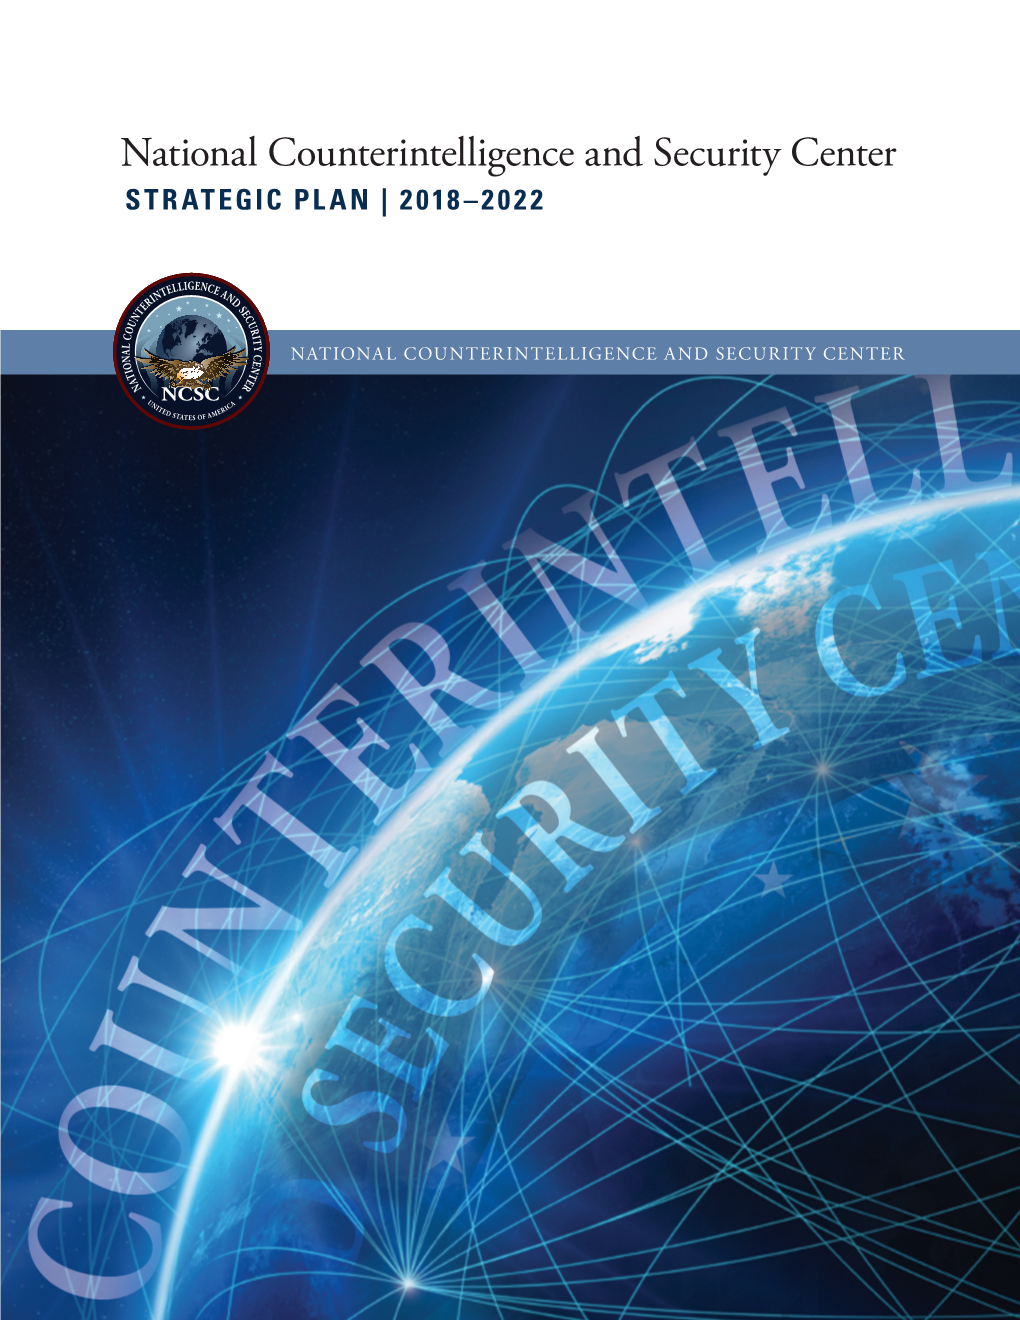 National Counterintelligence and Security Center STRATEGIC PLAN 2018